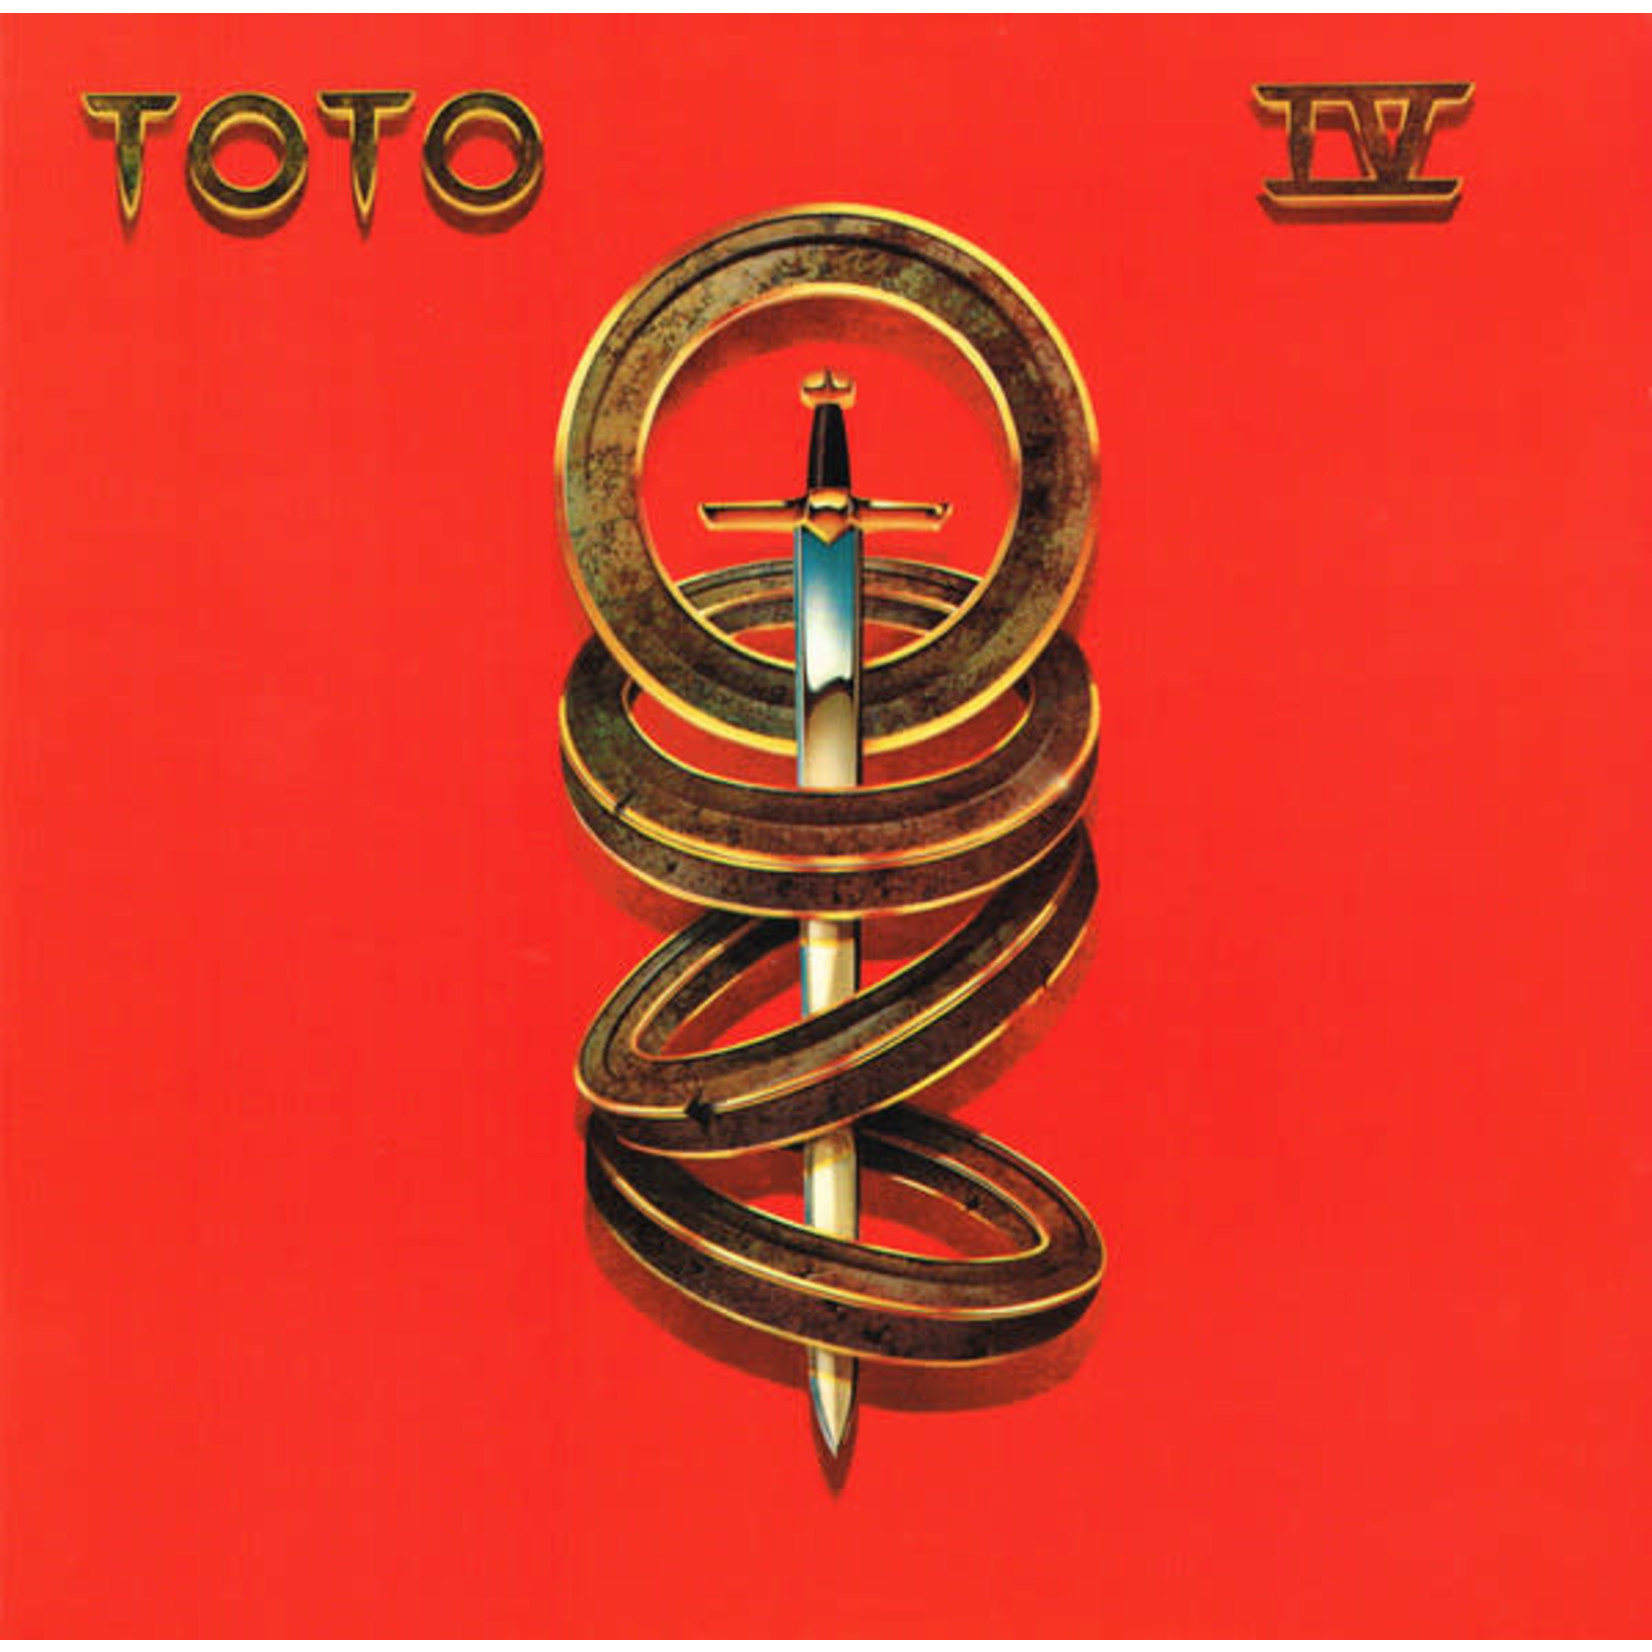 [New] Toto - Toto IV